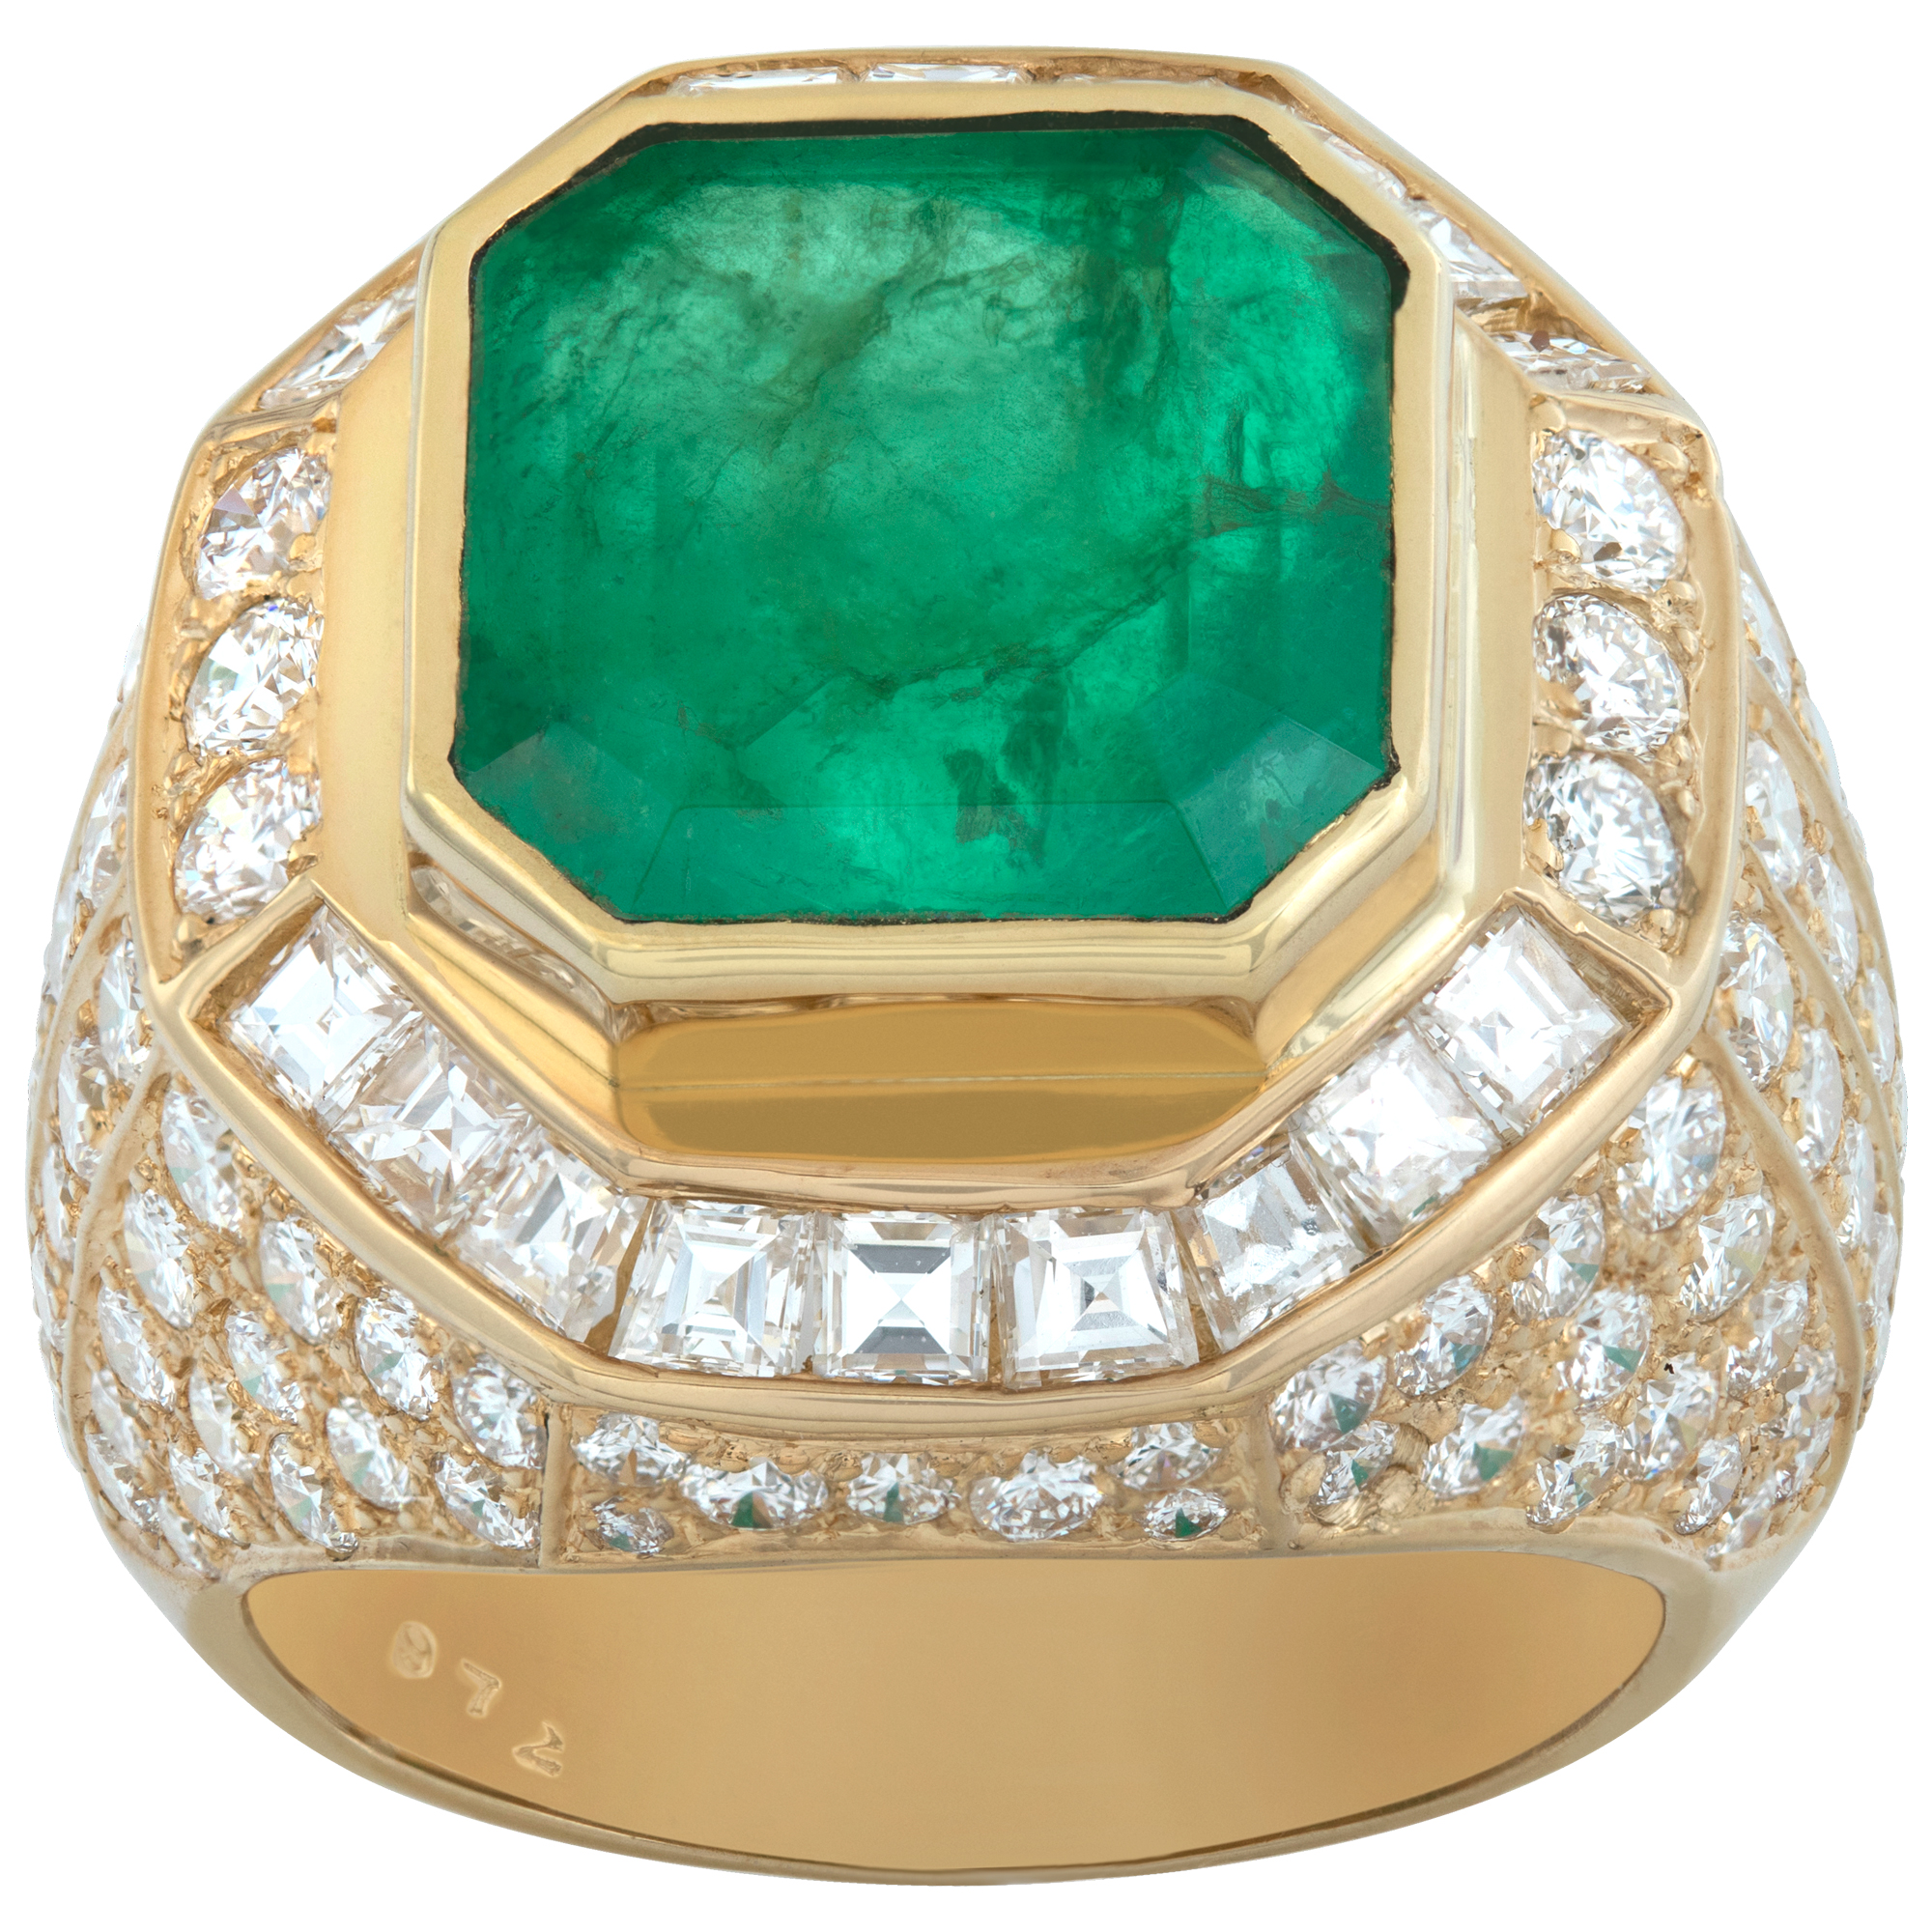 AGL certified, Colombian Emerald, 9.36 carats emerald cut shape set in 18k yellow gold diamonds mounting, with approx total weight over 7.00 carats round brilliant and emerald cut diamonds